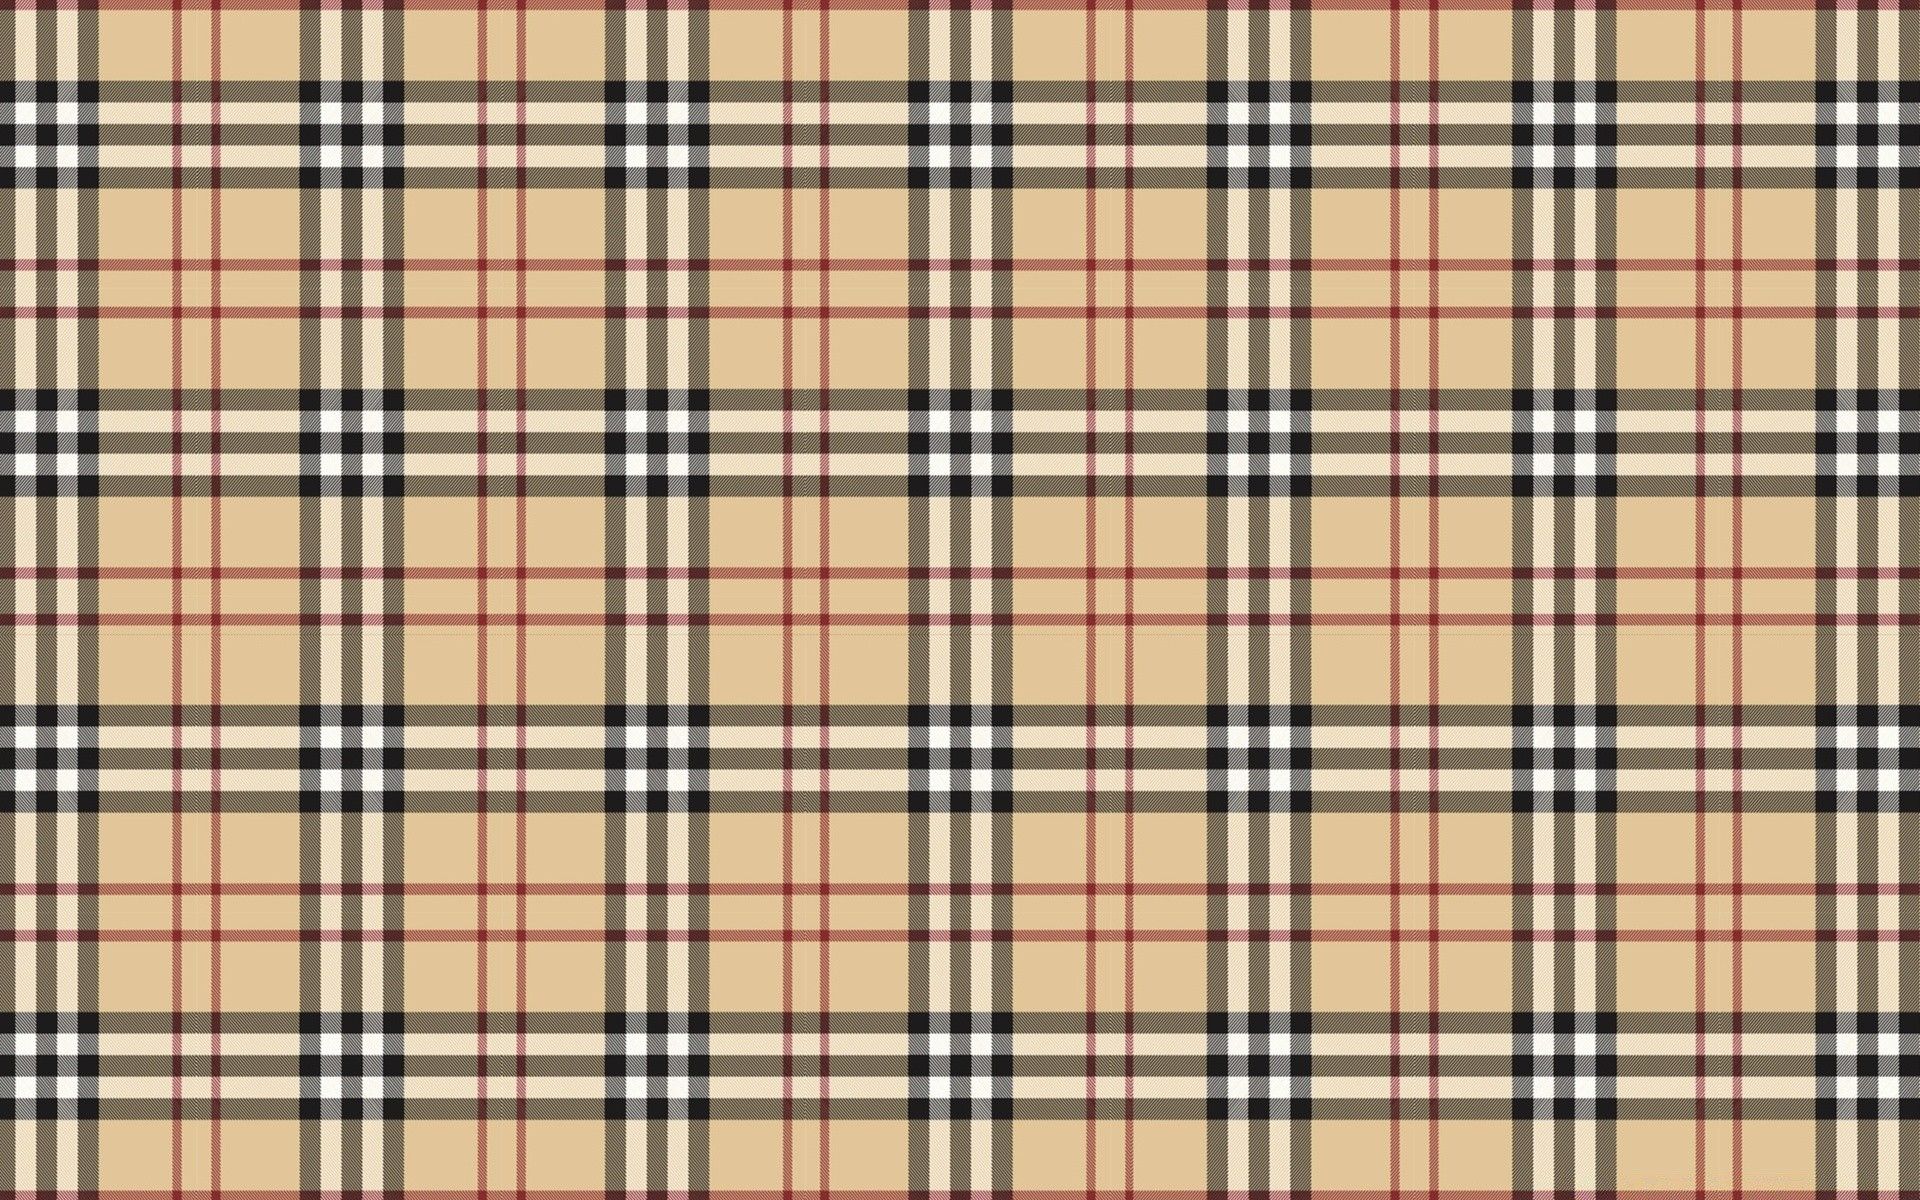 Burberry Logo Wallpapers